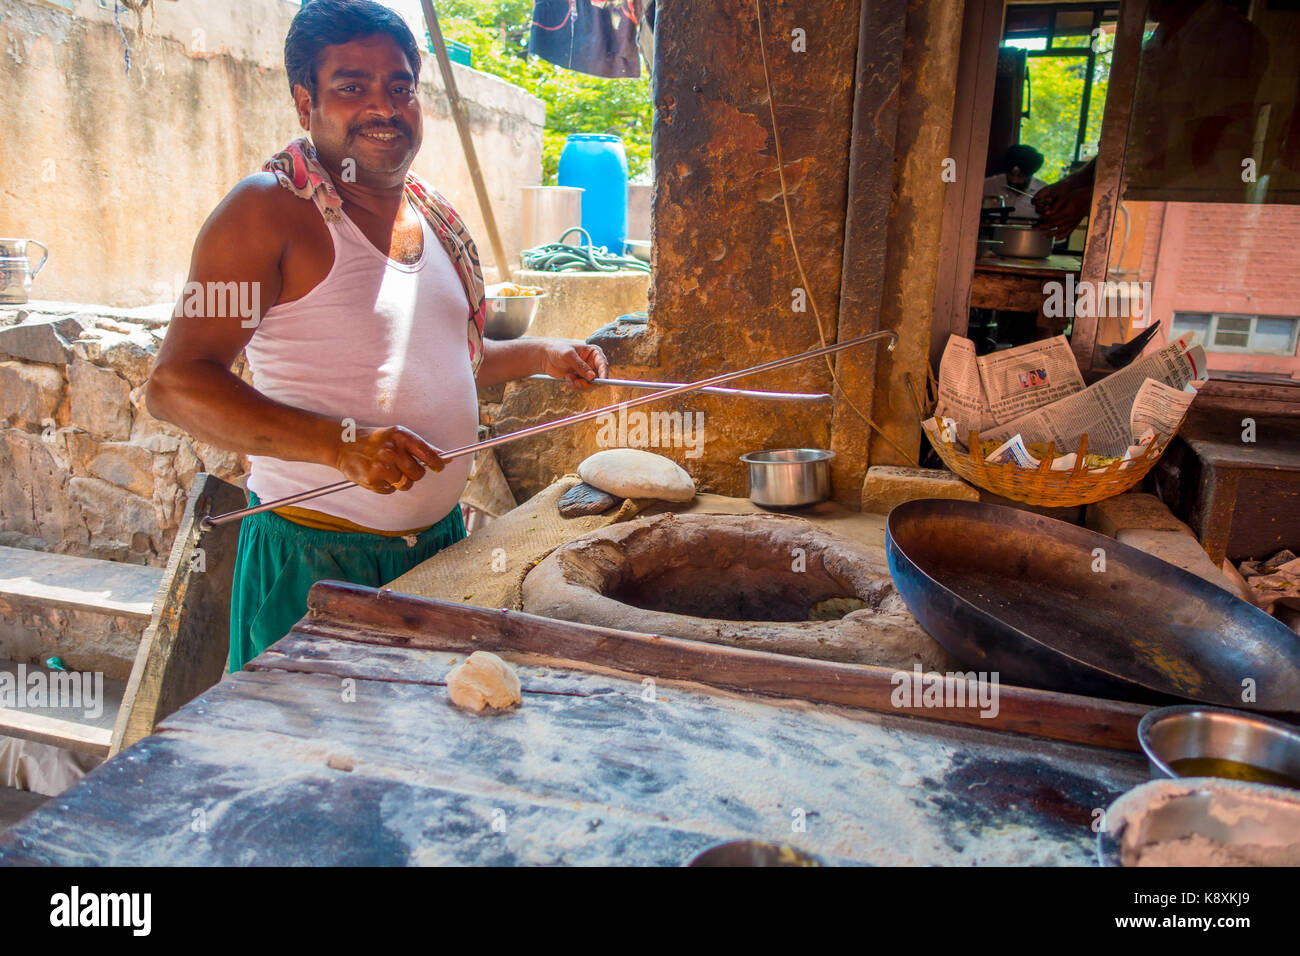 Jaipur, India - September 20, 2017: Unidentified man cooking in the kitchen homemade small tortillas inside of a stone oven, for breakfast in Jaipur city, in India Stock Photo